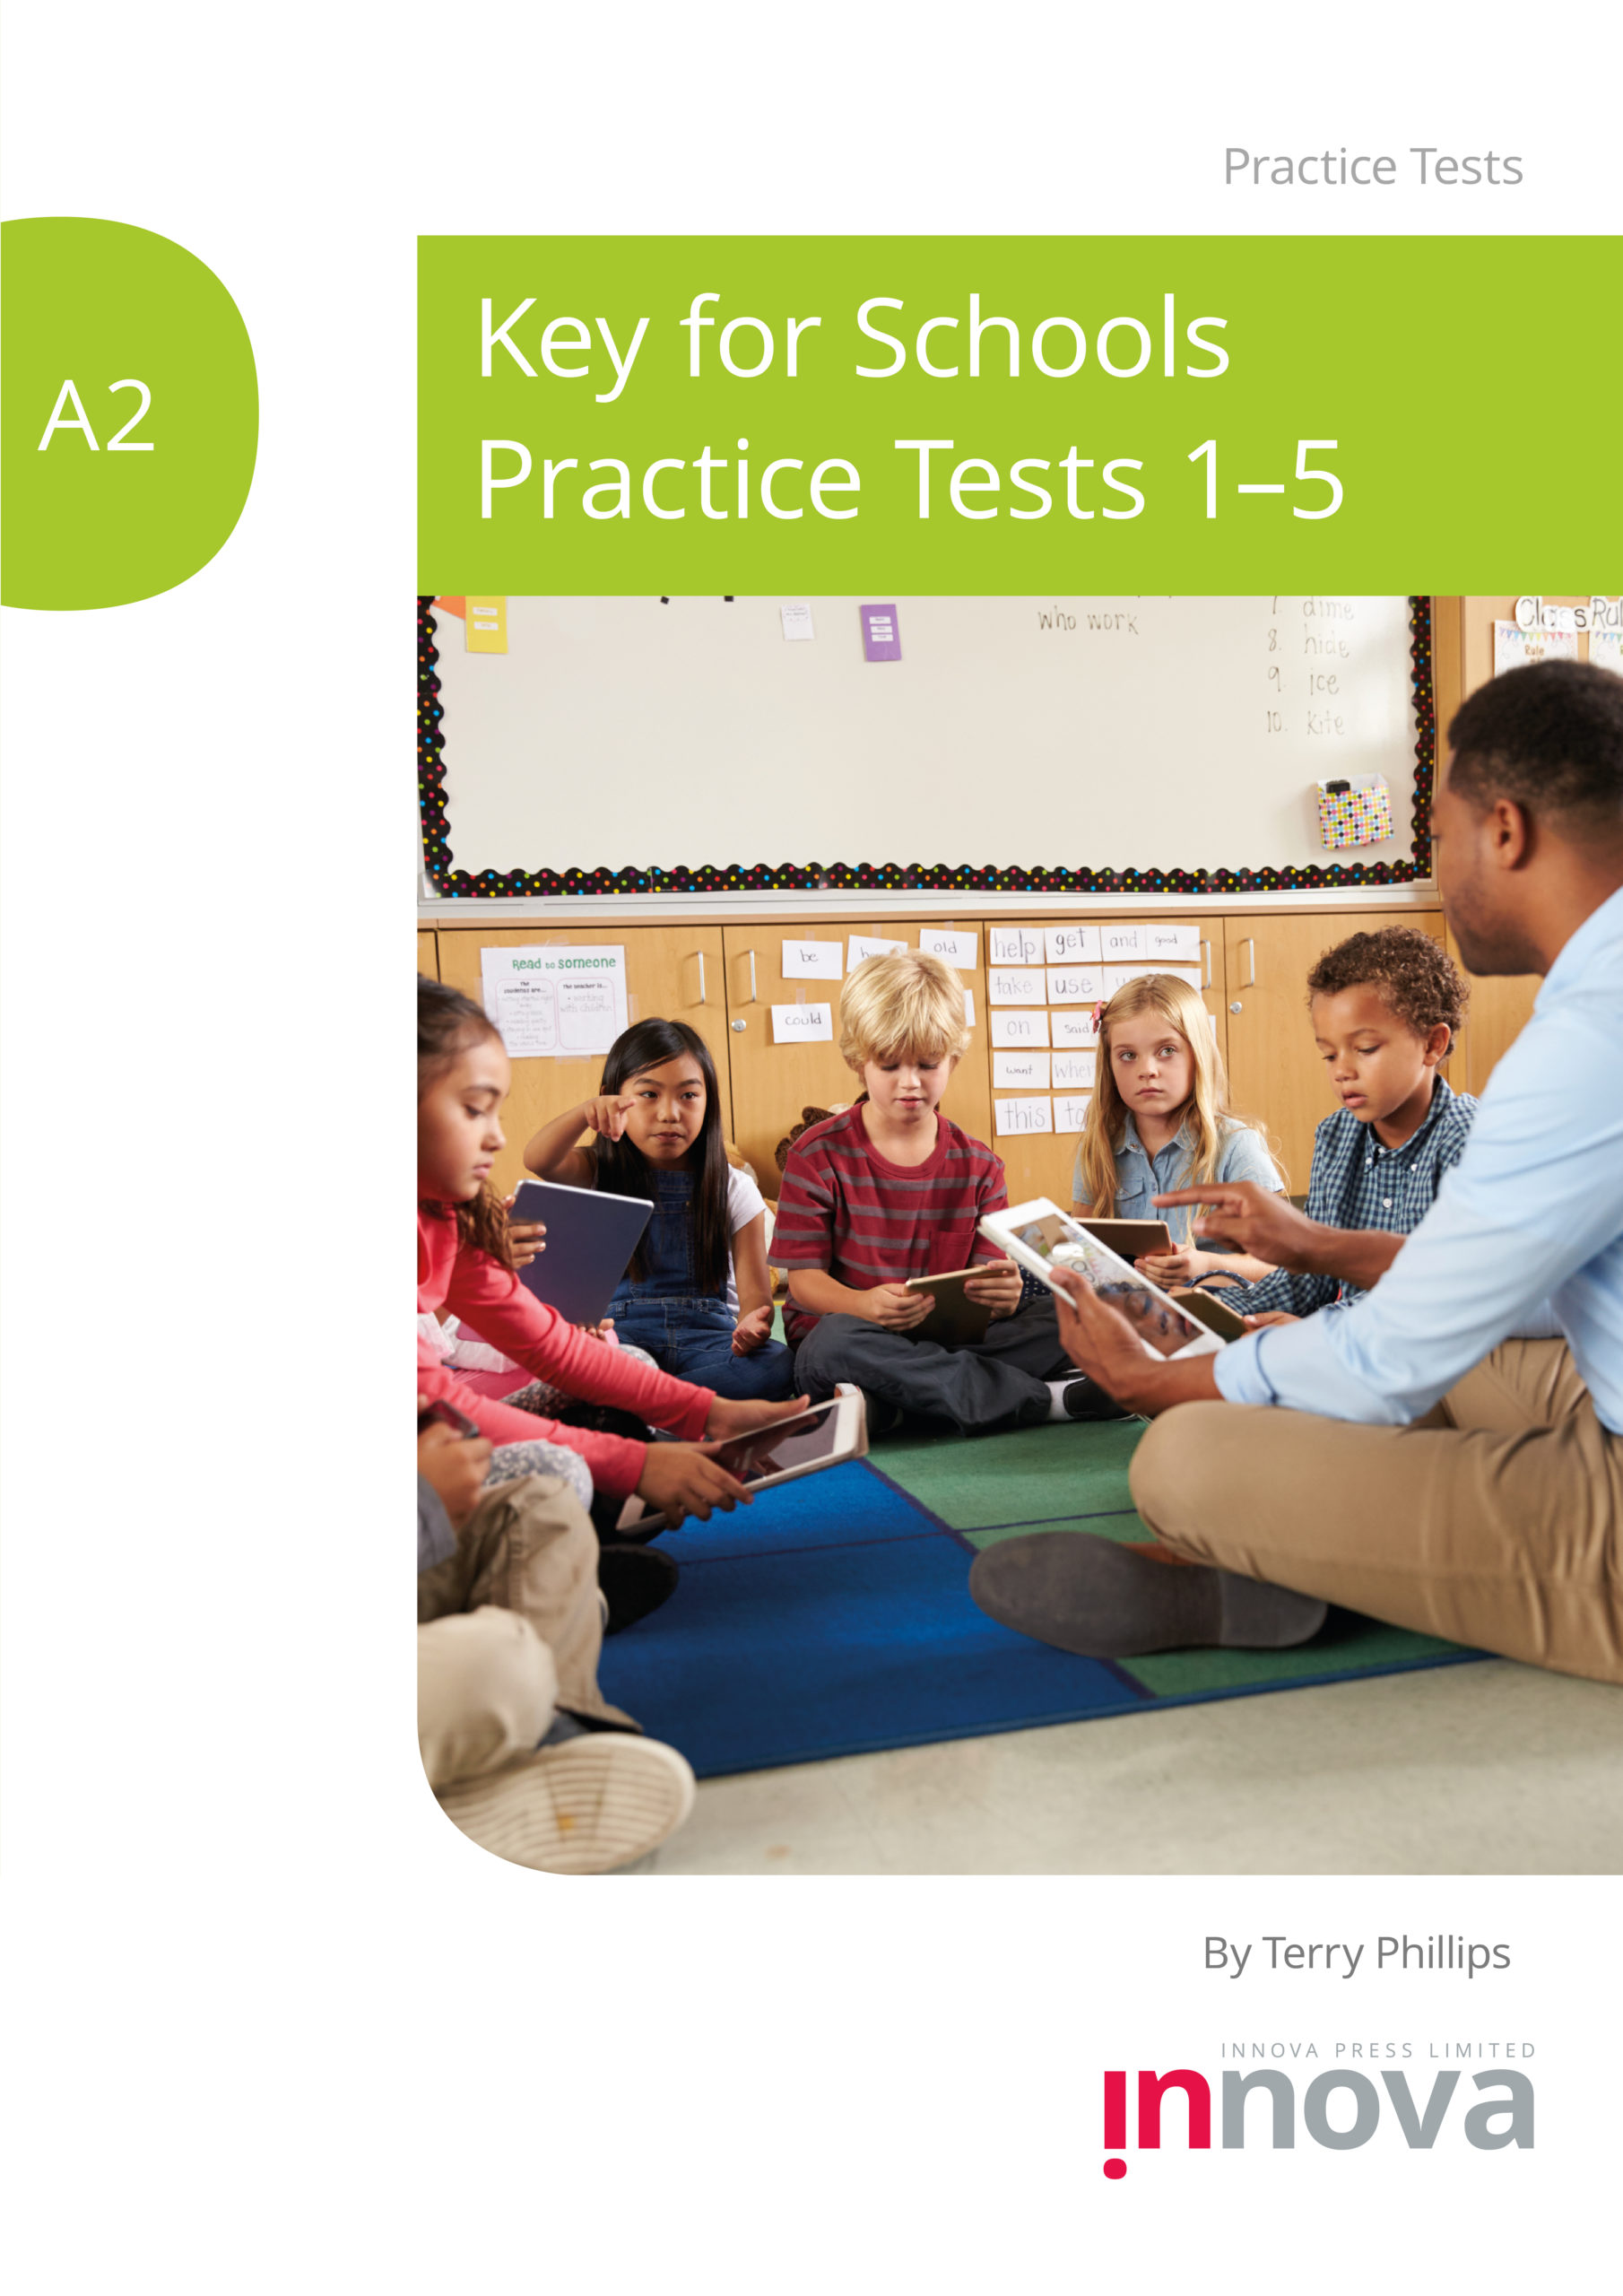 cover for A2 Key for Schools practice tests 1-5, lime green heading, cover image of a small class of children sitting cross legged in front of a whiteboard facing a teacher who is also cross legged on the floor. All of them are holding ipad devices.